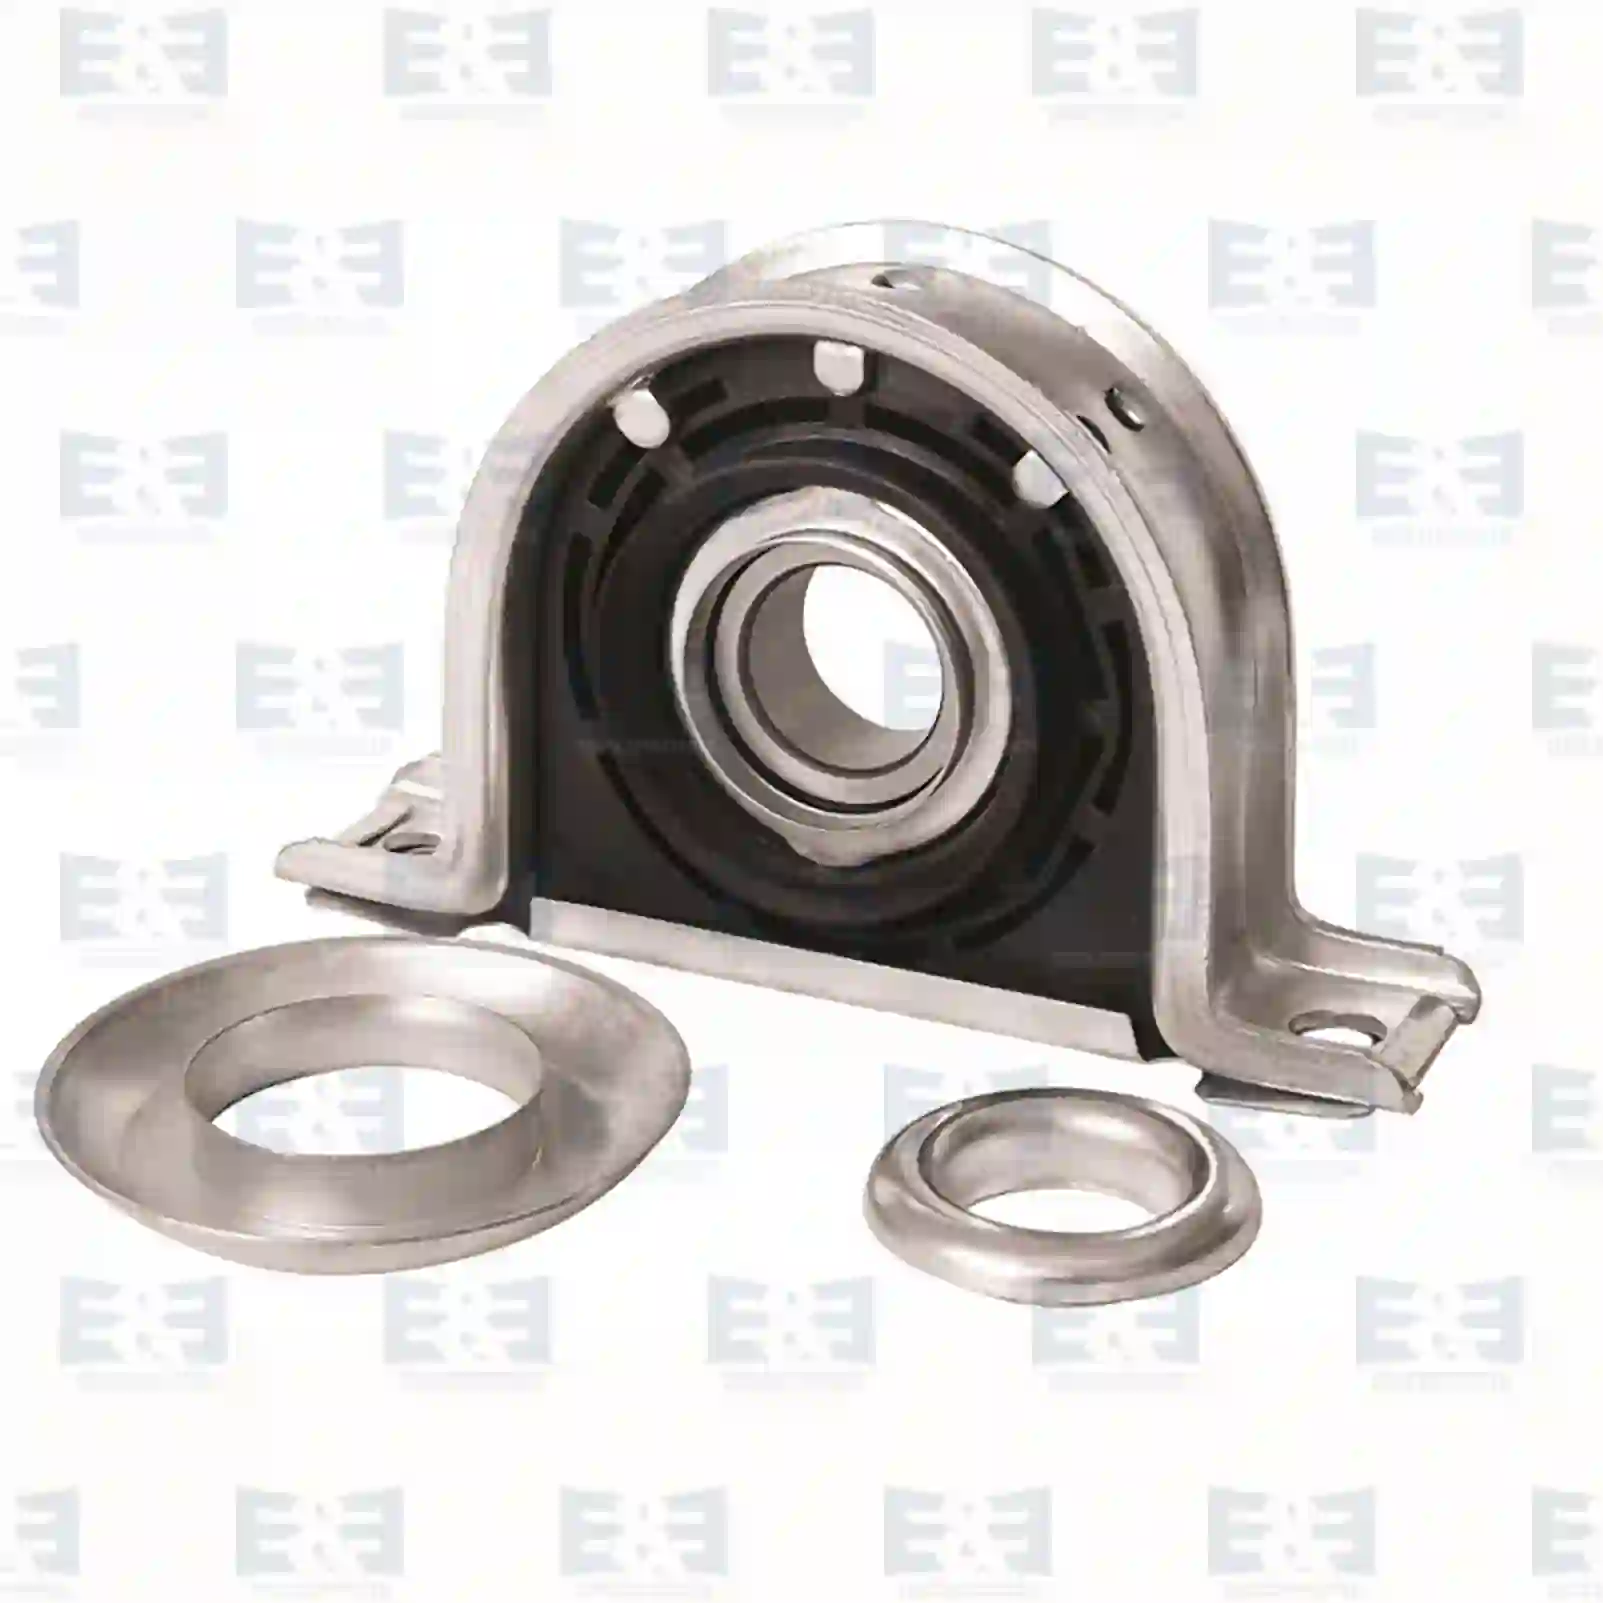 Support Bearing Center bearing, EE No 2E2276895 ,  oem no:04682902, 42536523, 4682902, 93160226, 5000242914, 5000816438, 1070171, 1697203, 20362601, 20845657, ZG02502-0008 E&E Truck Spare Parts | Truck Spare Parts, Auotomotive Spare Parts